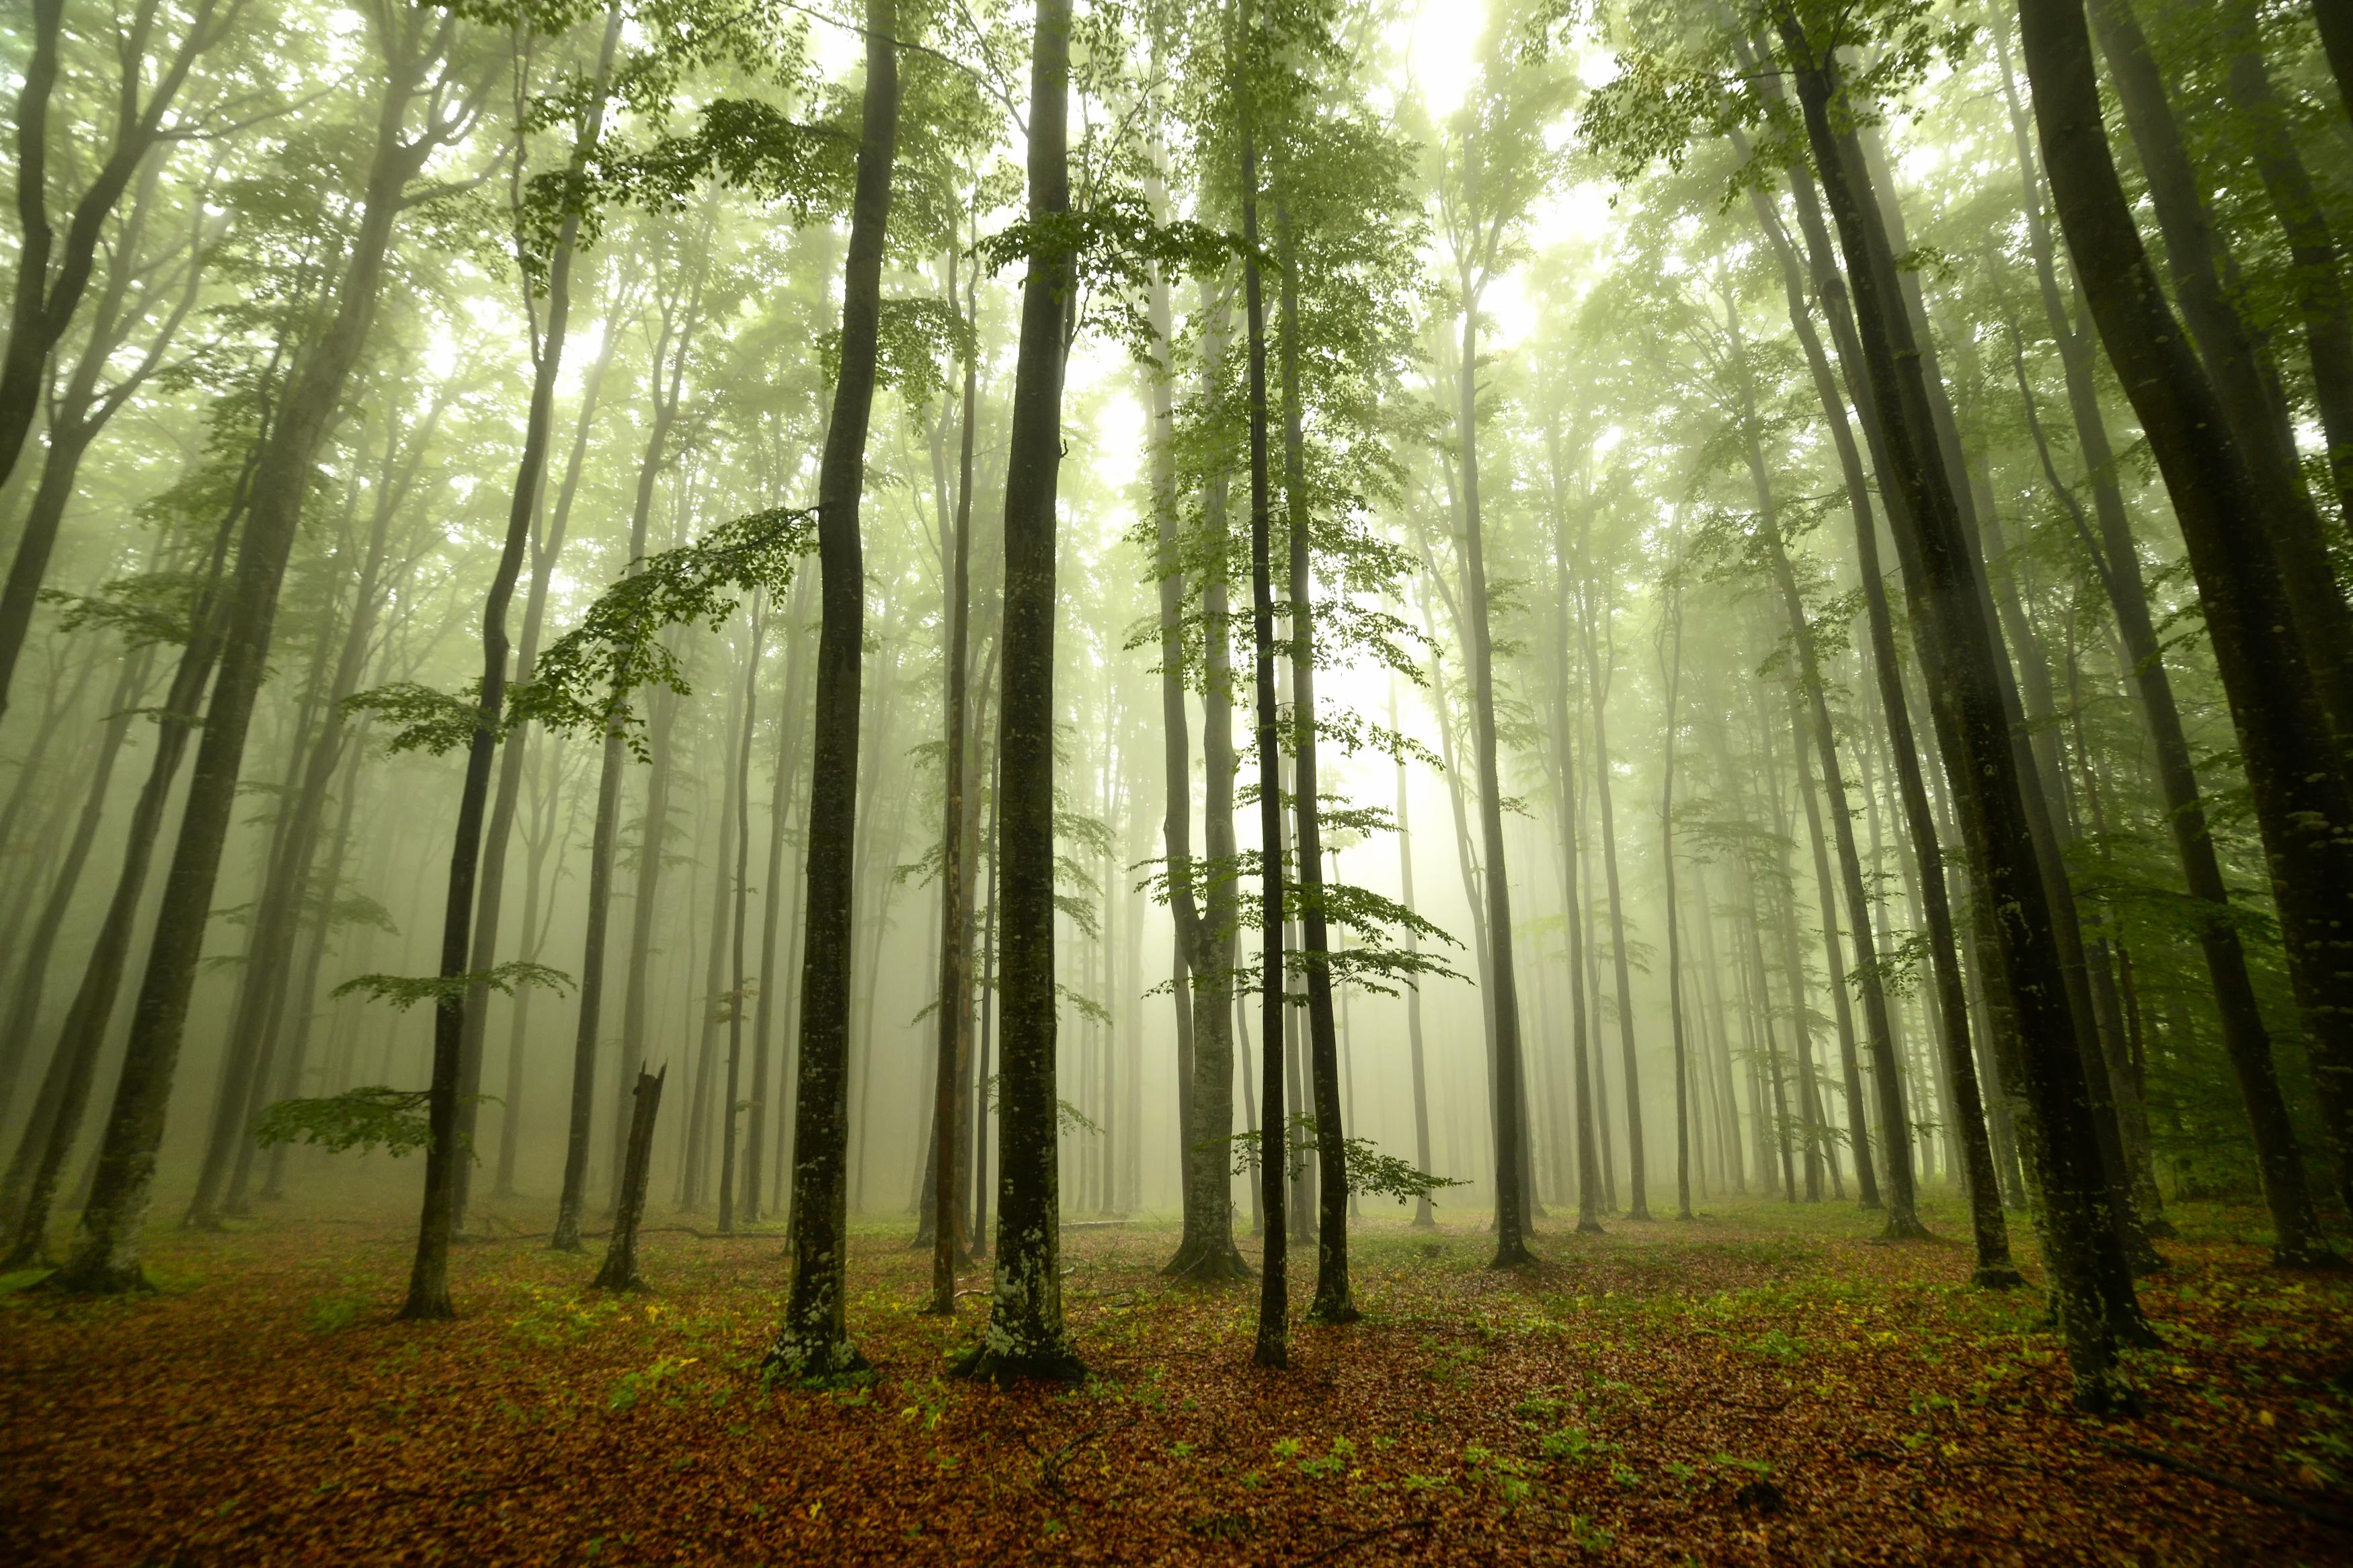 Tall green trees surrounded by fog and leaves